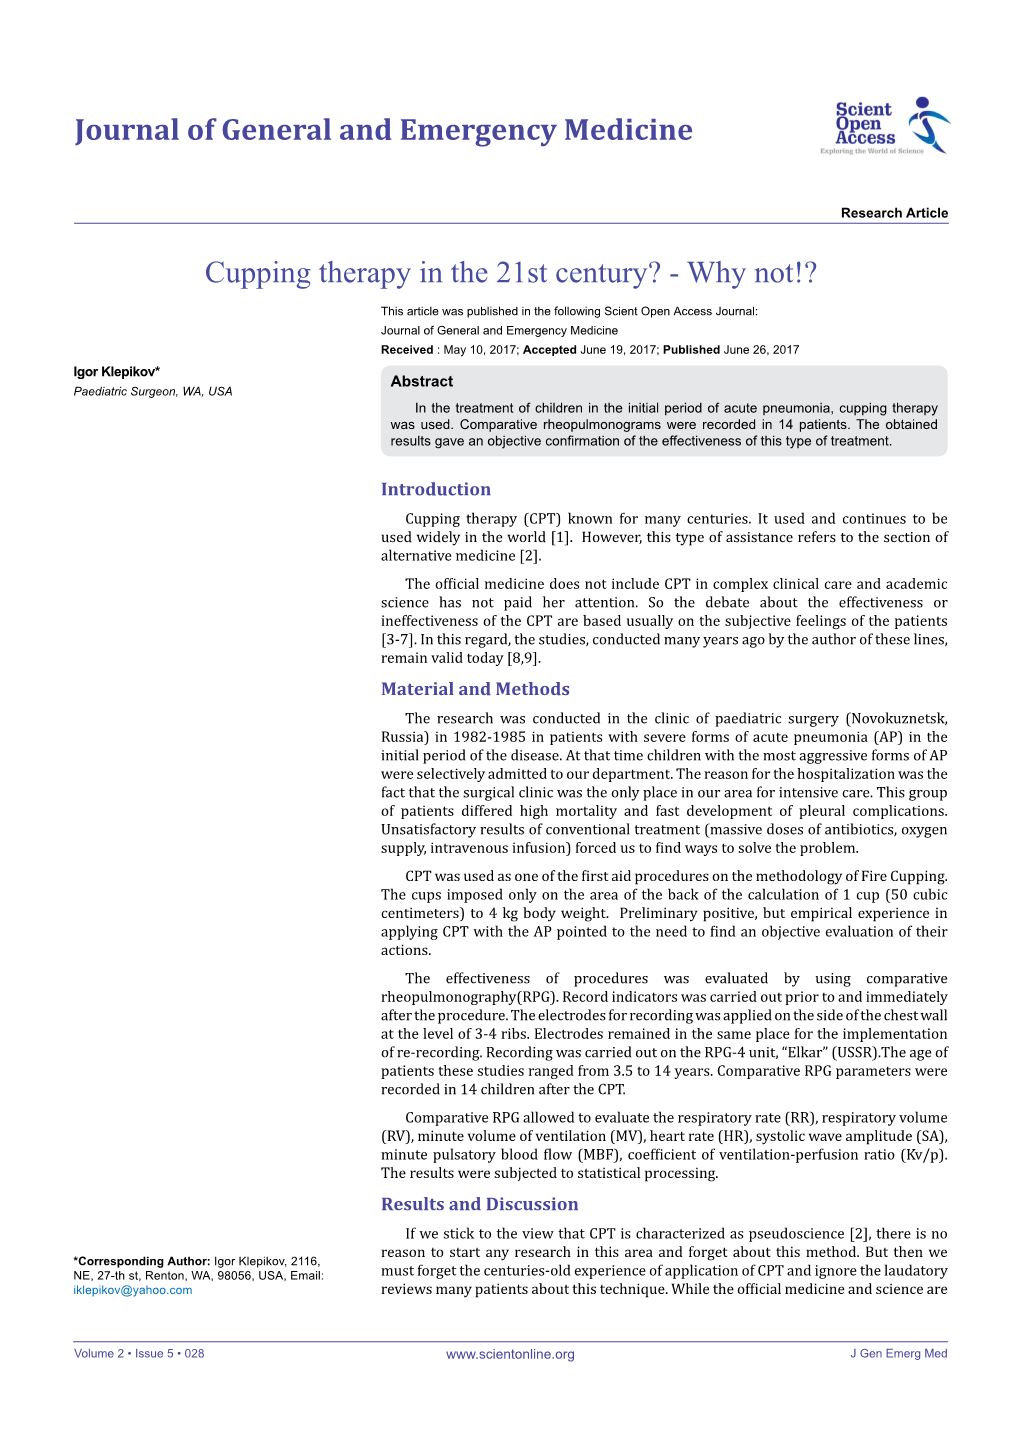 Cupping Therapy in the 21St Century? - Why Not!?